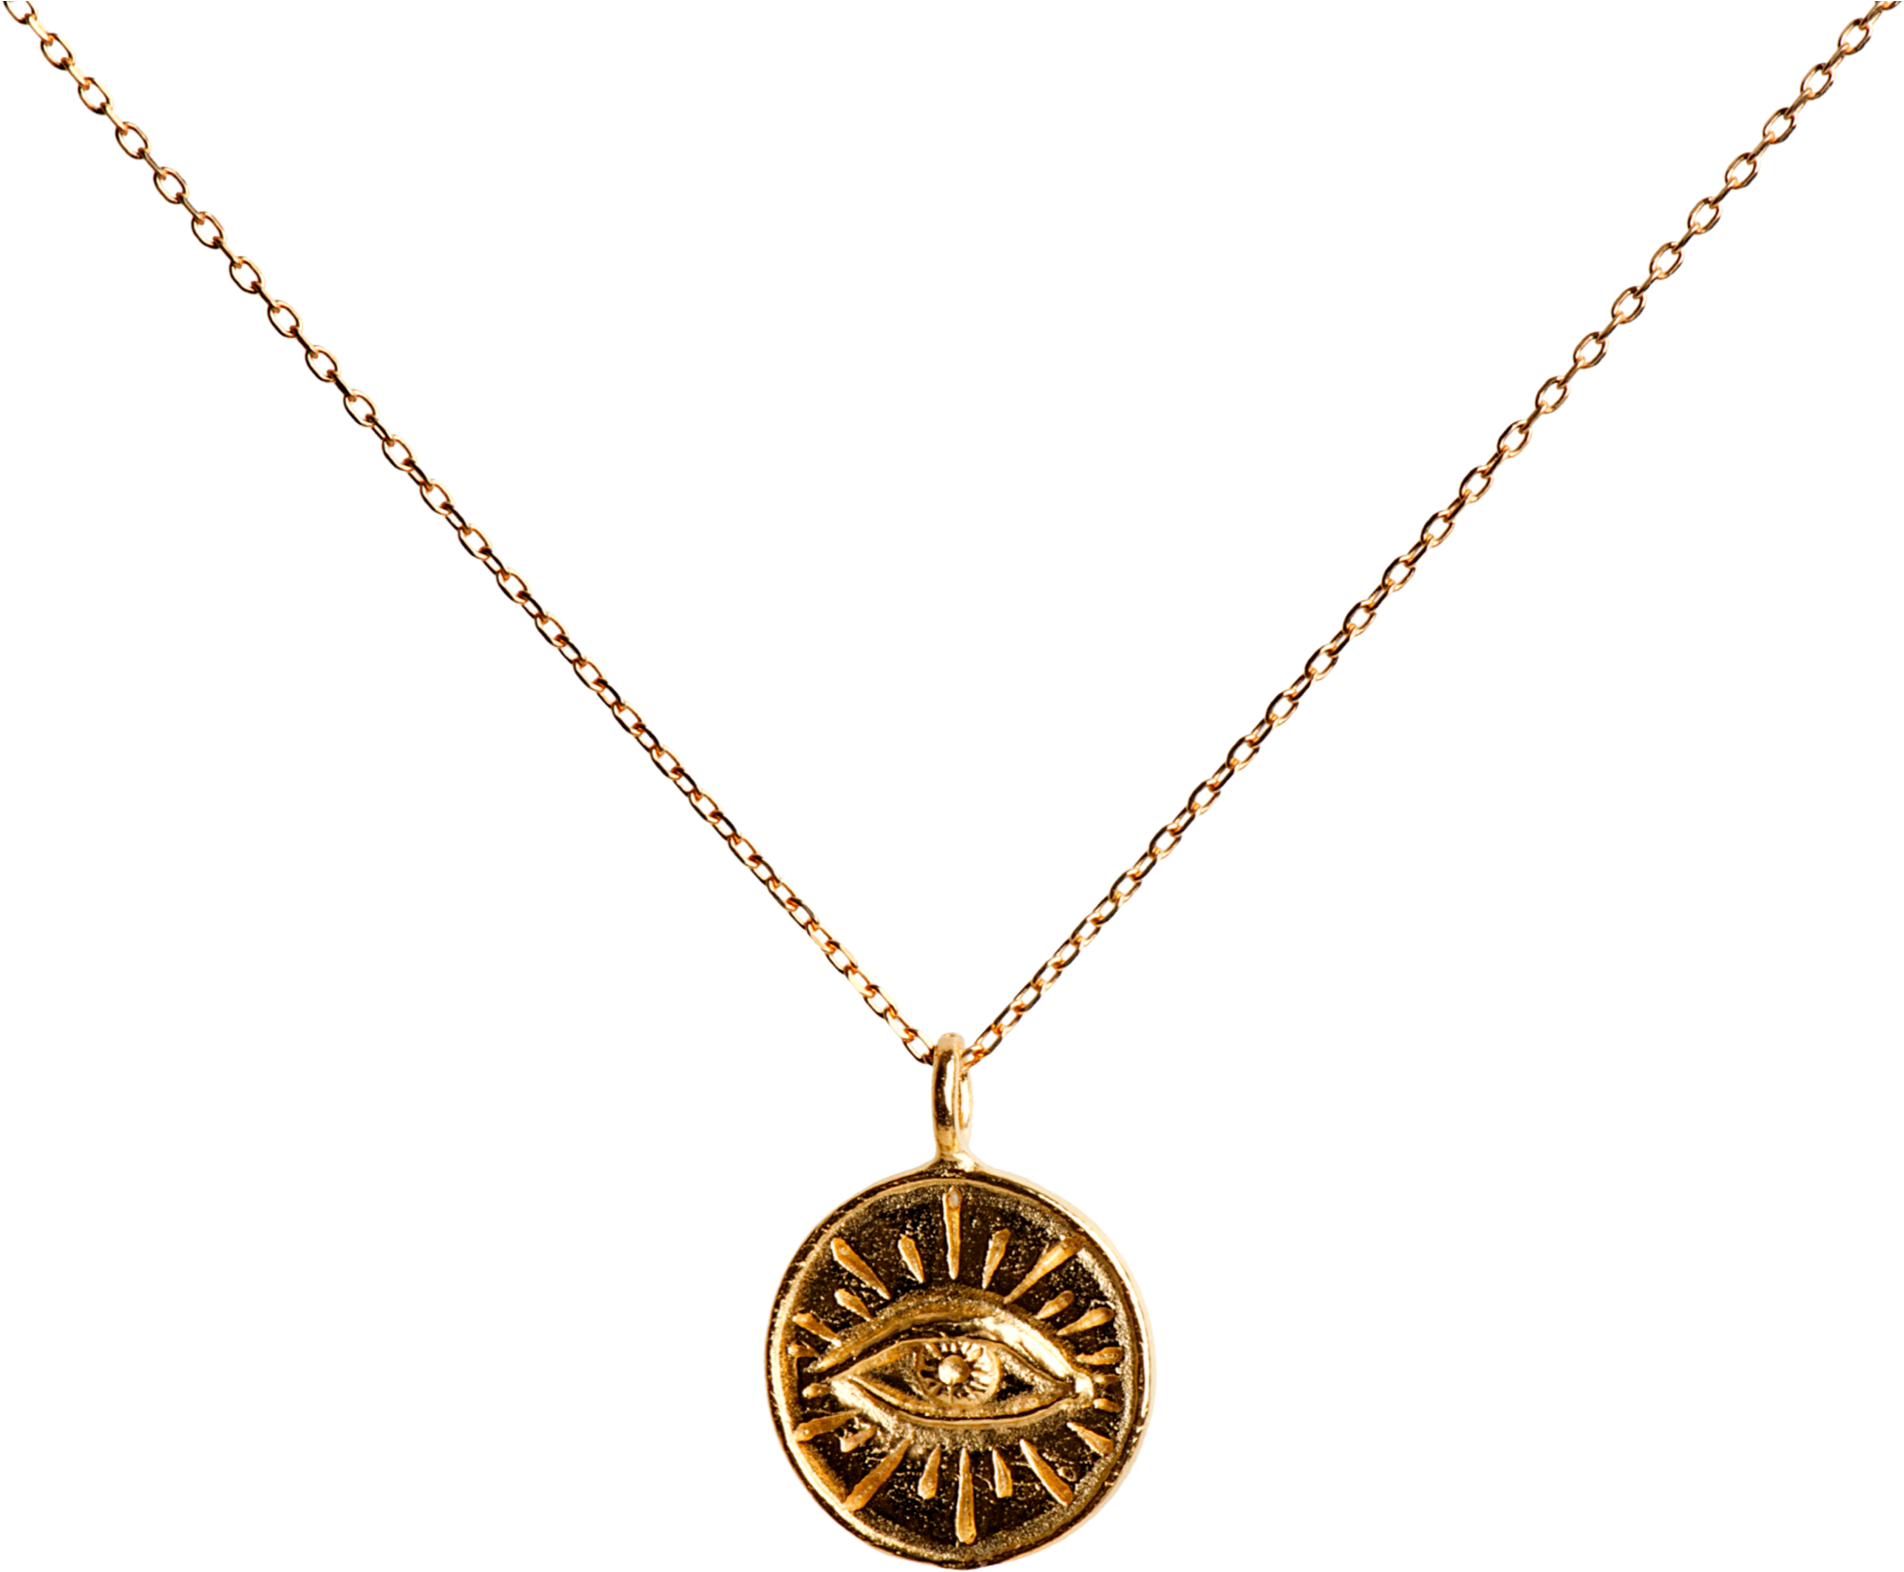 Download In Yellow Gold - Locket PNG Image with No Background - PNGkey.com